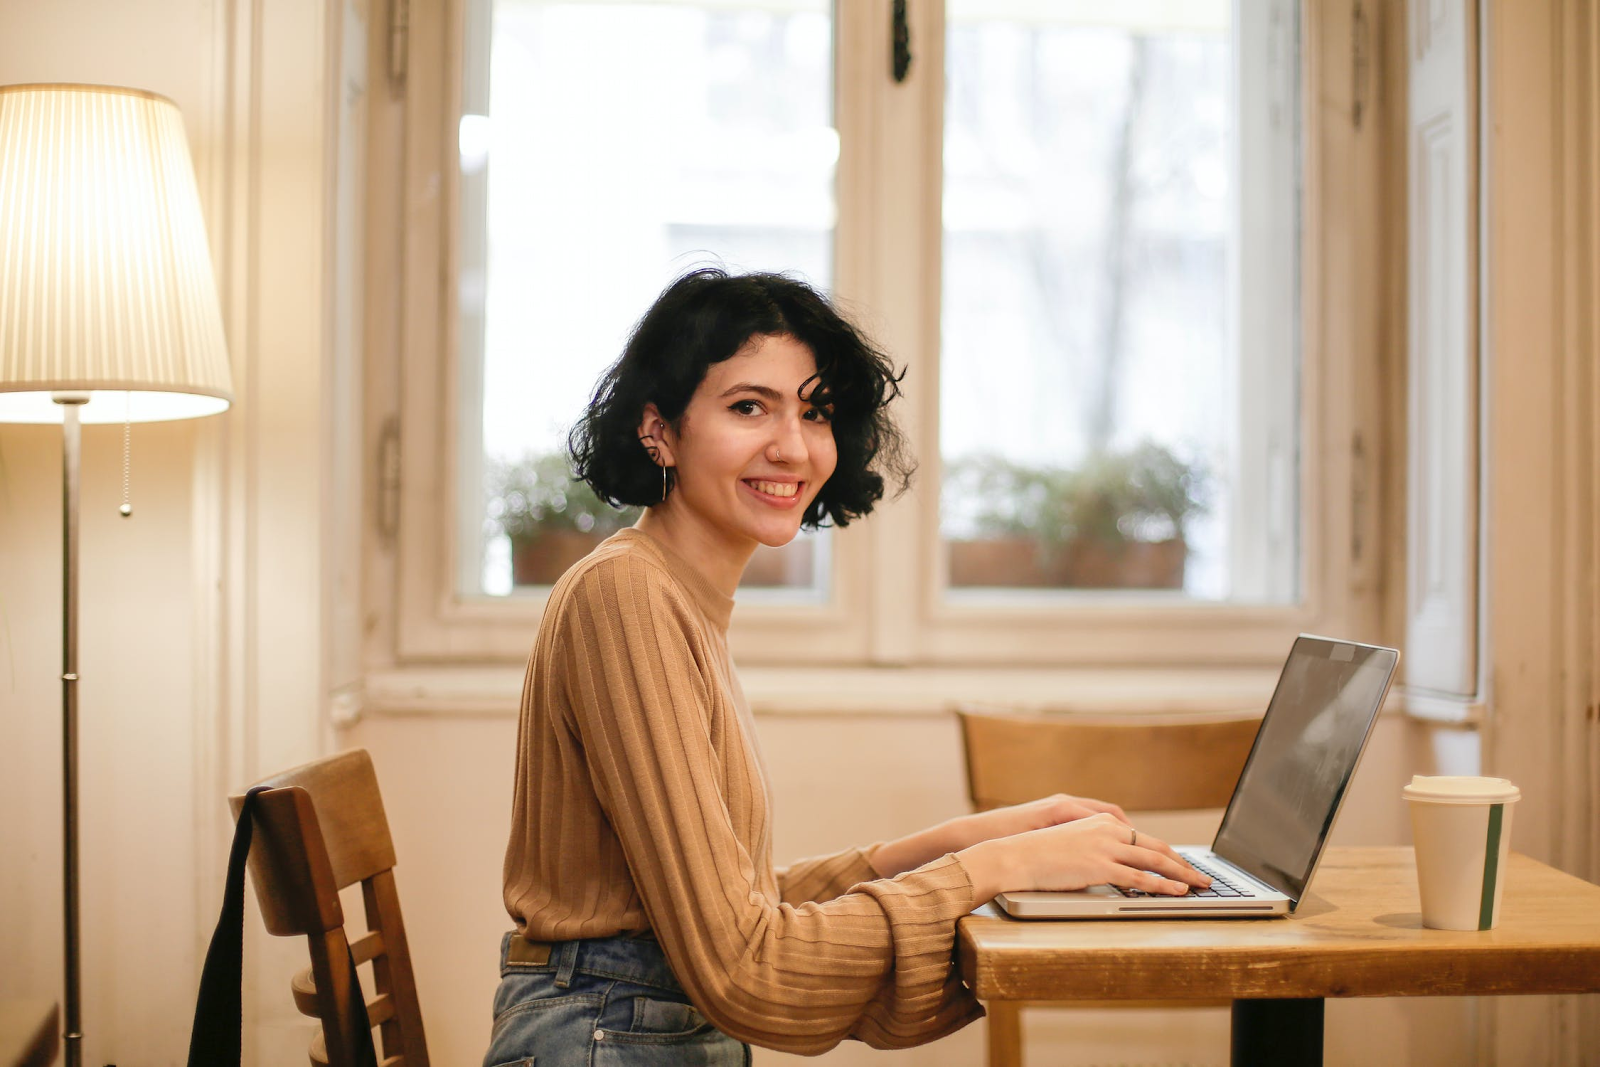 Woman working on her laptop at a desk while smiling towards the camera